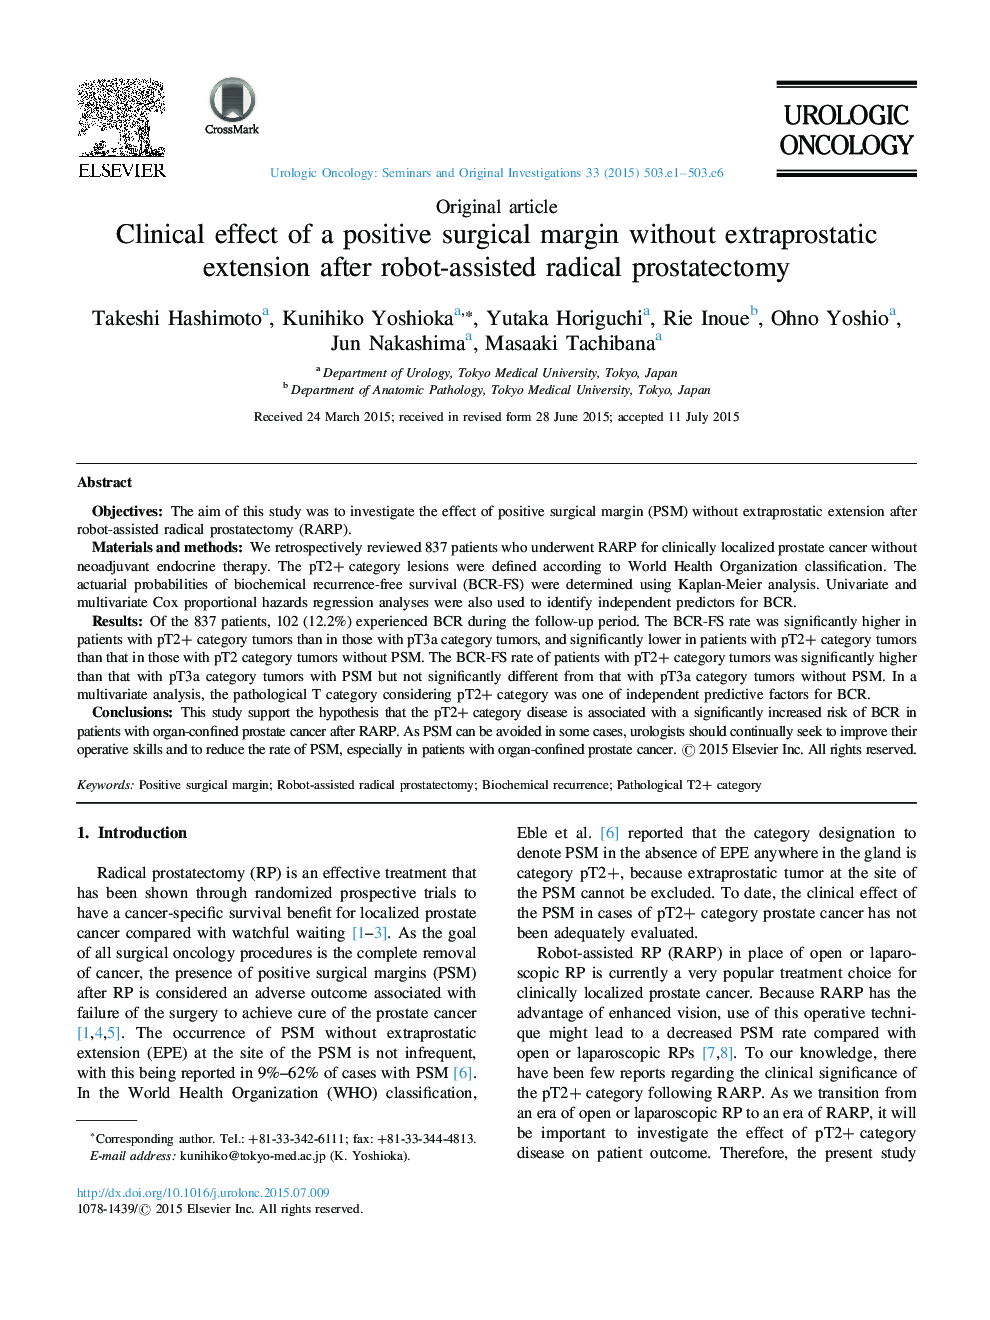 Clinical effect of a positive surgical margin without extraprostatic extension after robot-assisted radical prostatectomy